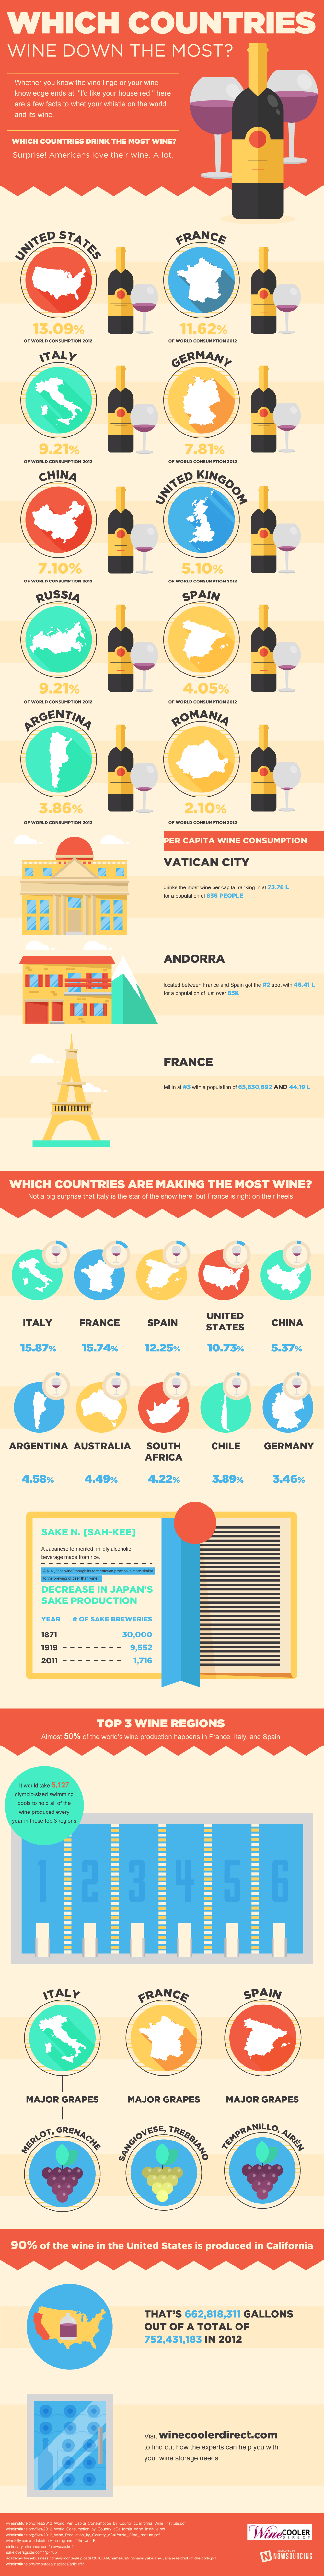 Which Countries Drink the Most Wine?